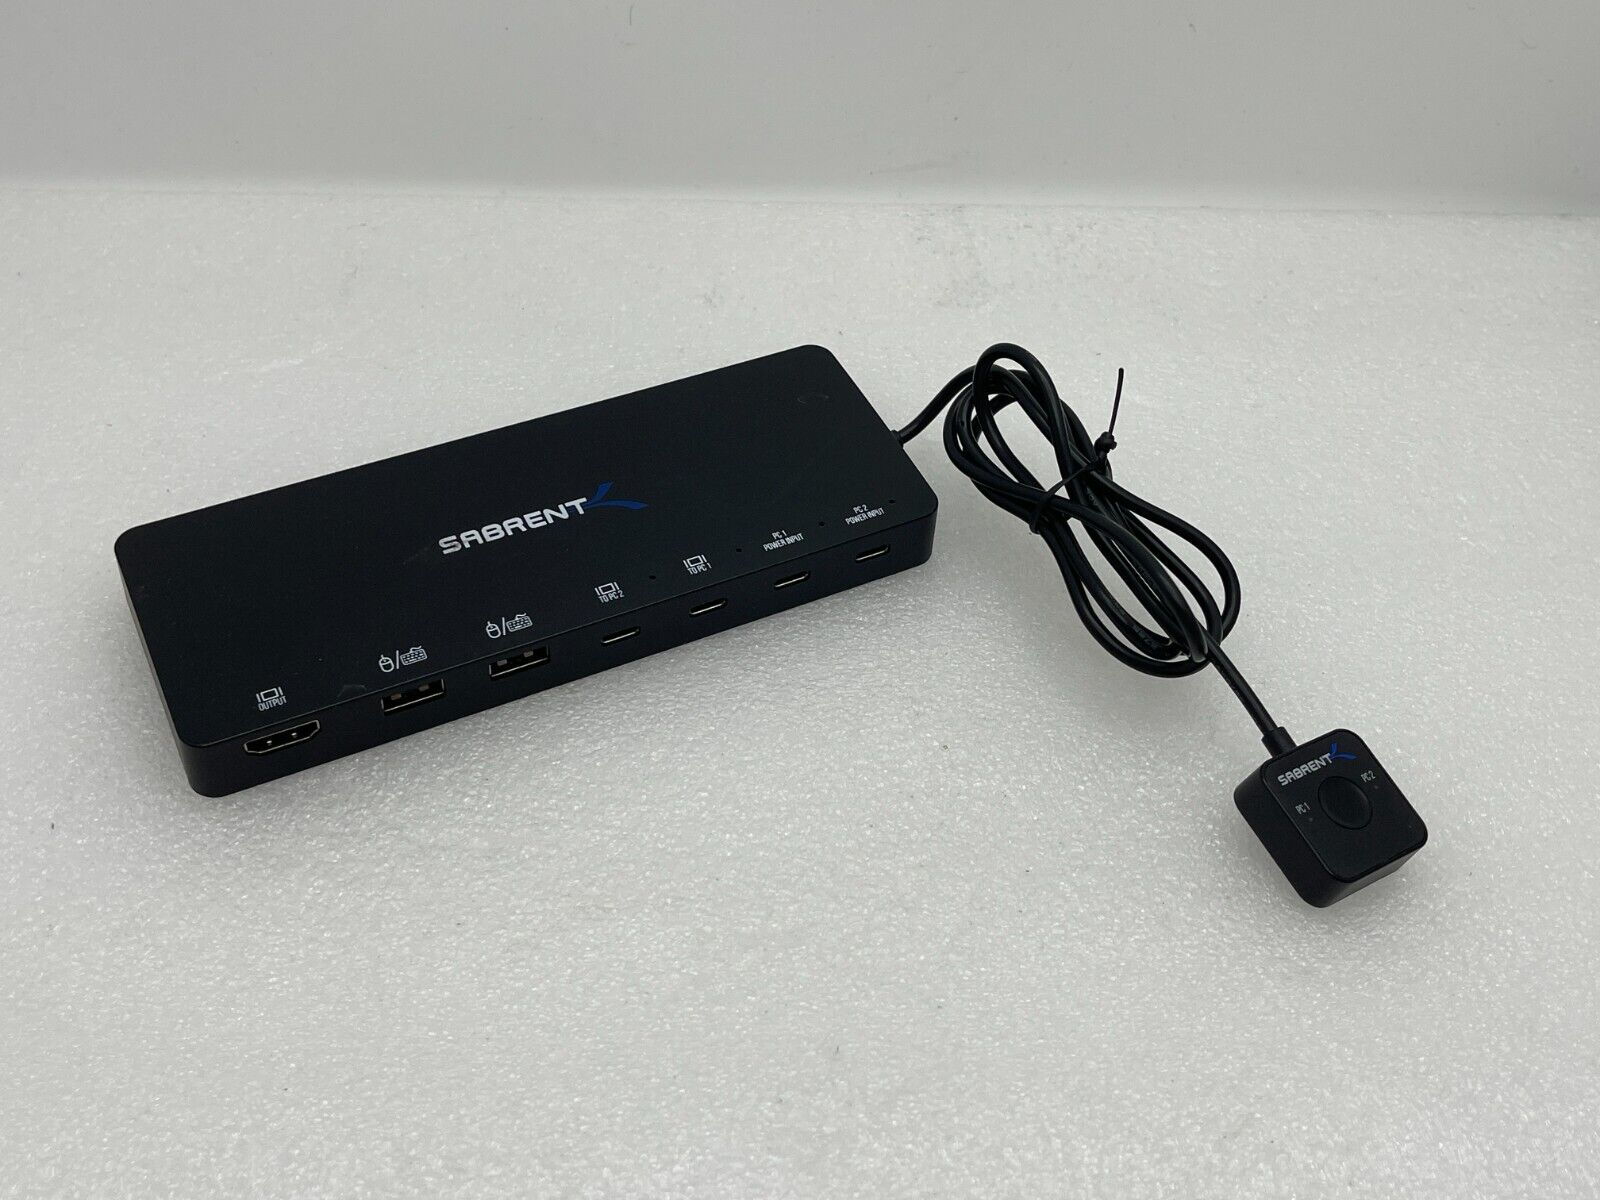 SABRENT 2-Port USB Type-C KVM Switch with 60 Watt Power Delivery Option USB-KCPD